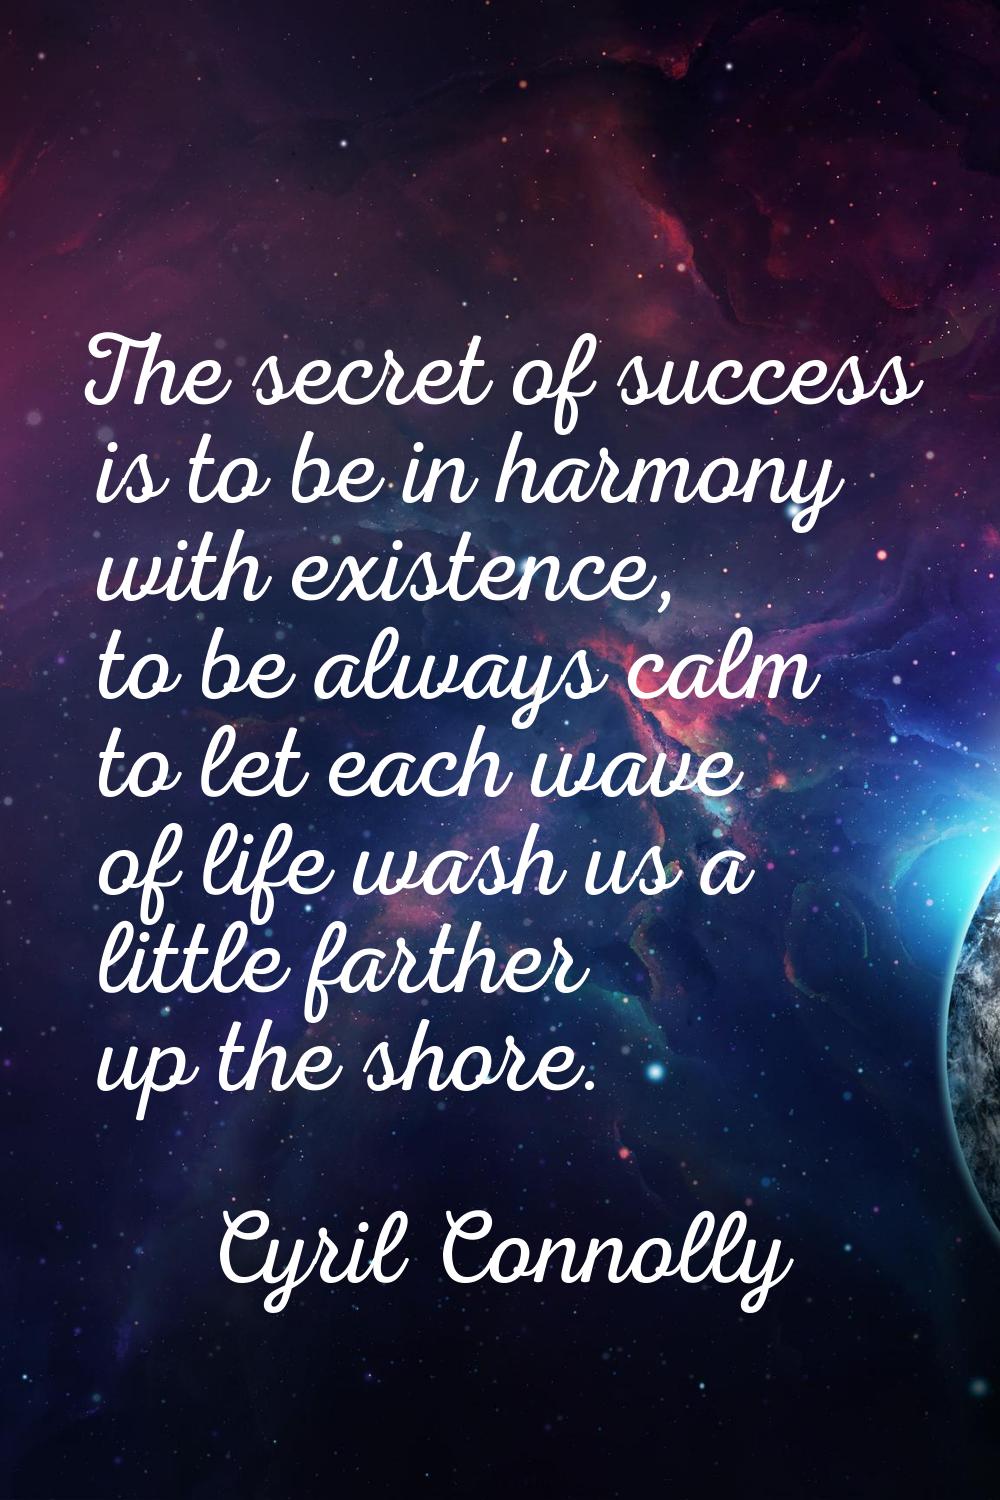 The secret of success is to be in harmony with existence, to be always calm to let each wave of lif